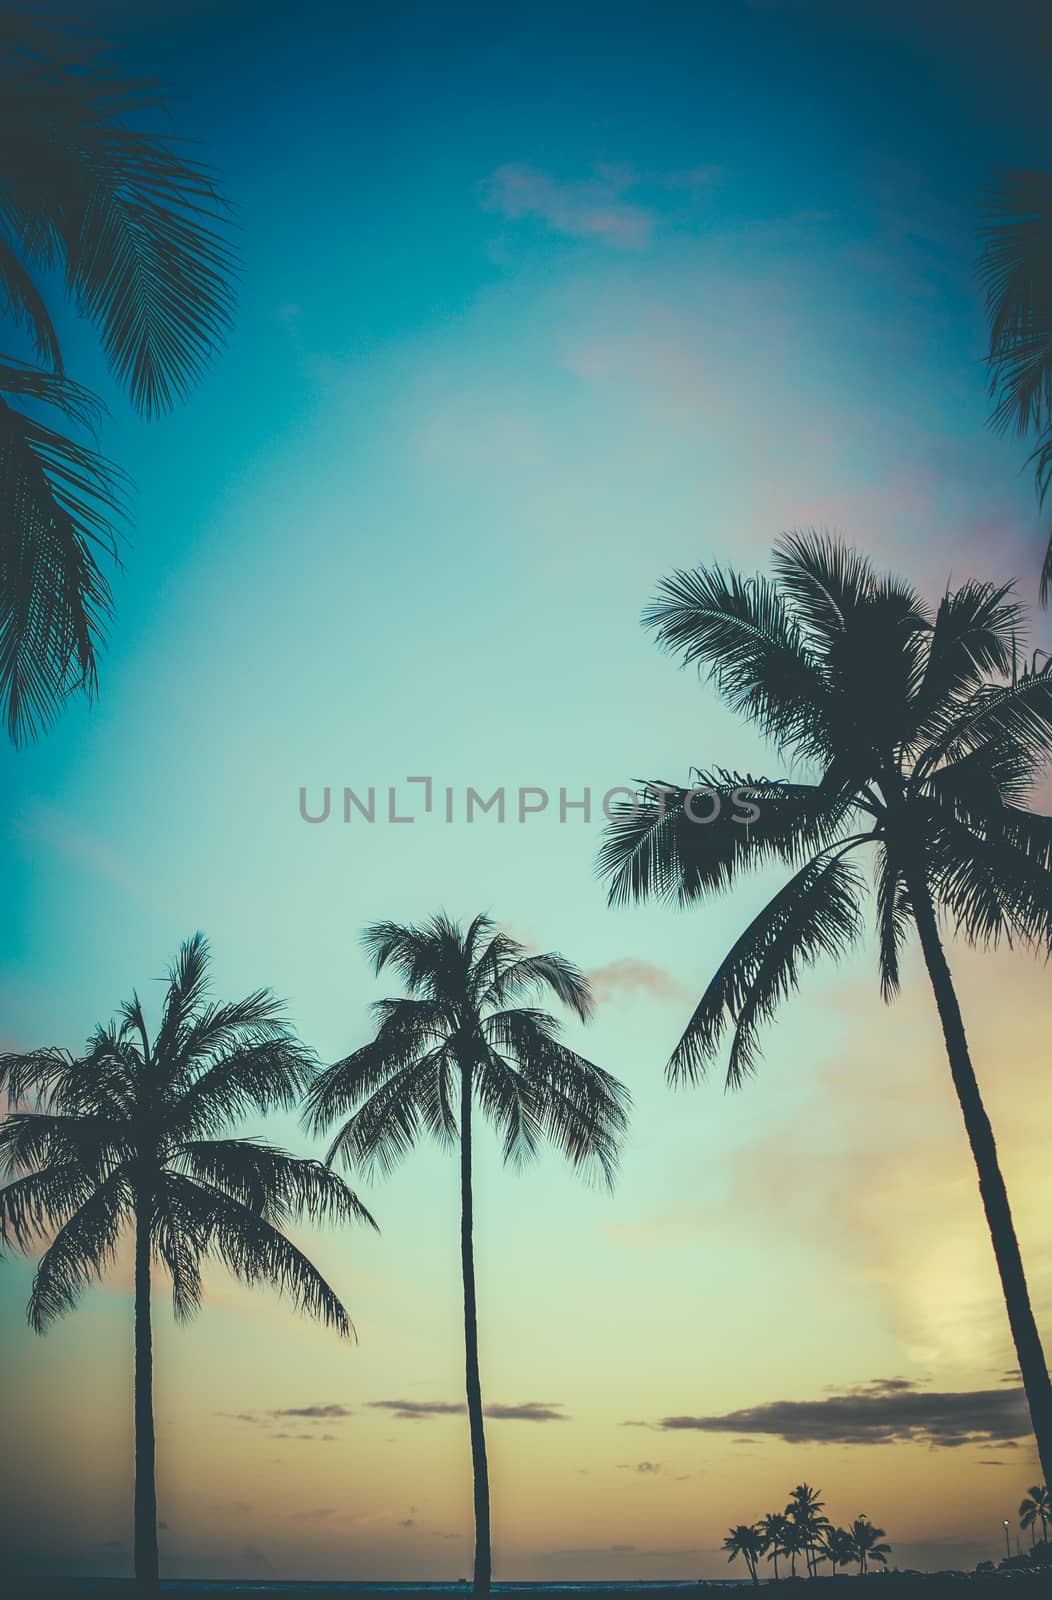 Faded Retro Style Photo Of Palm Trees In Hawaii At Sunset